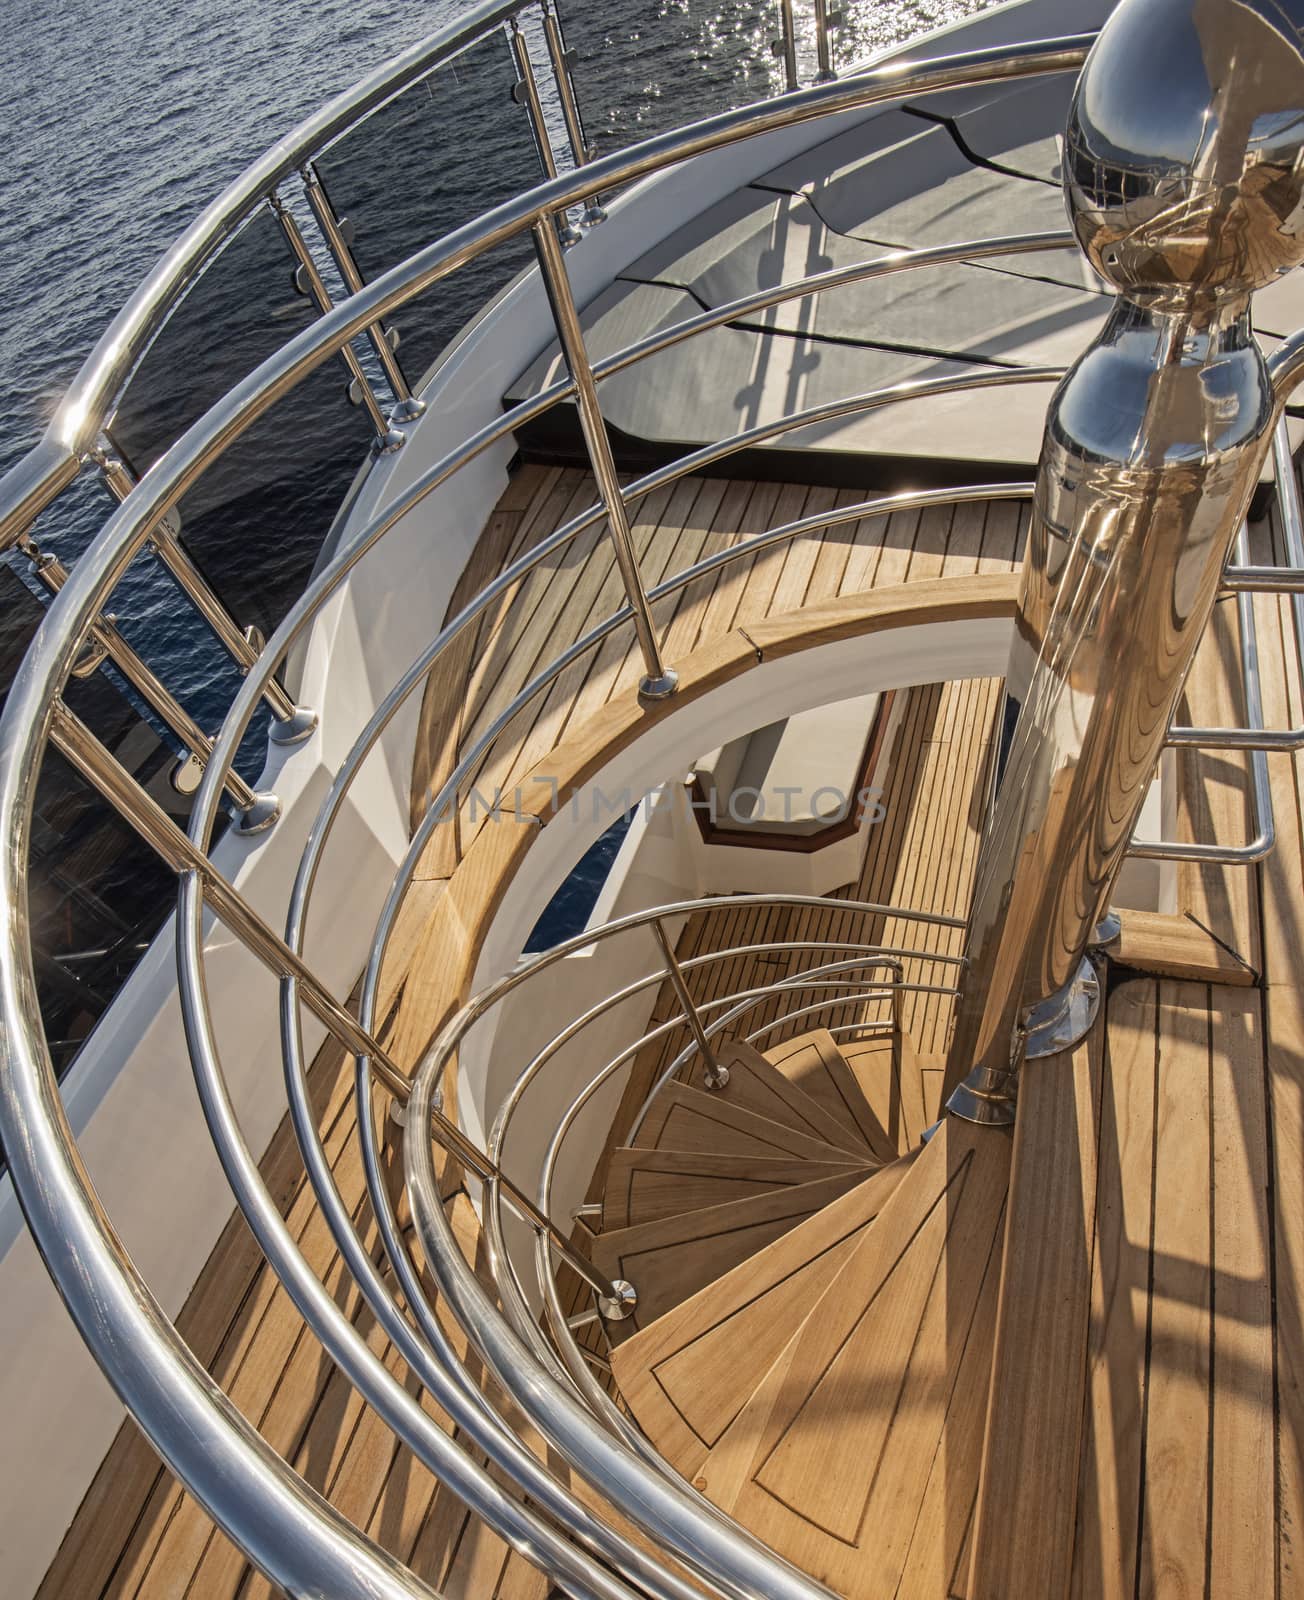 Abstract view of wooden curved spiral staircase on sundeck area of large luxury motor yacht